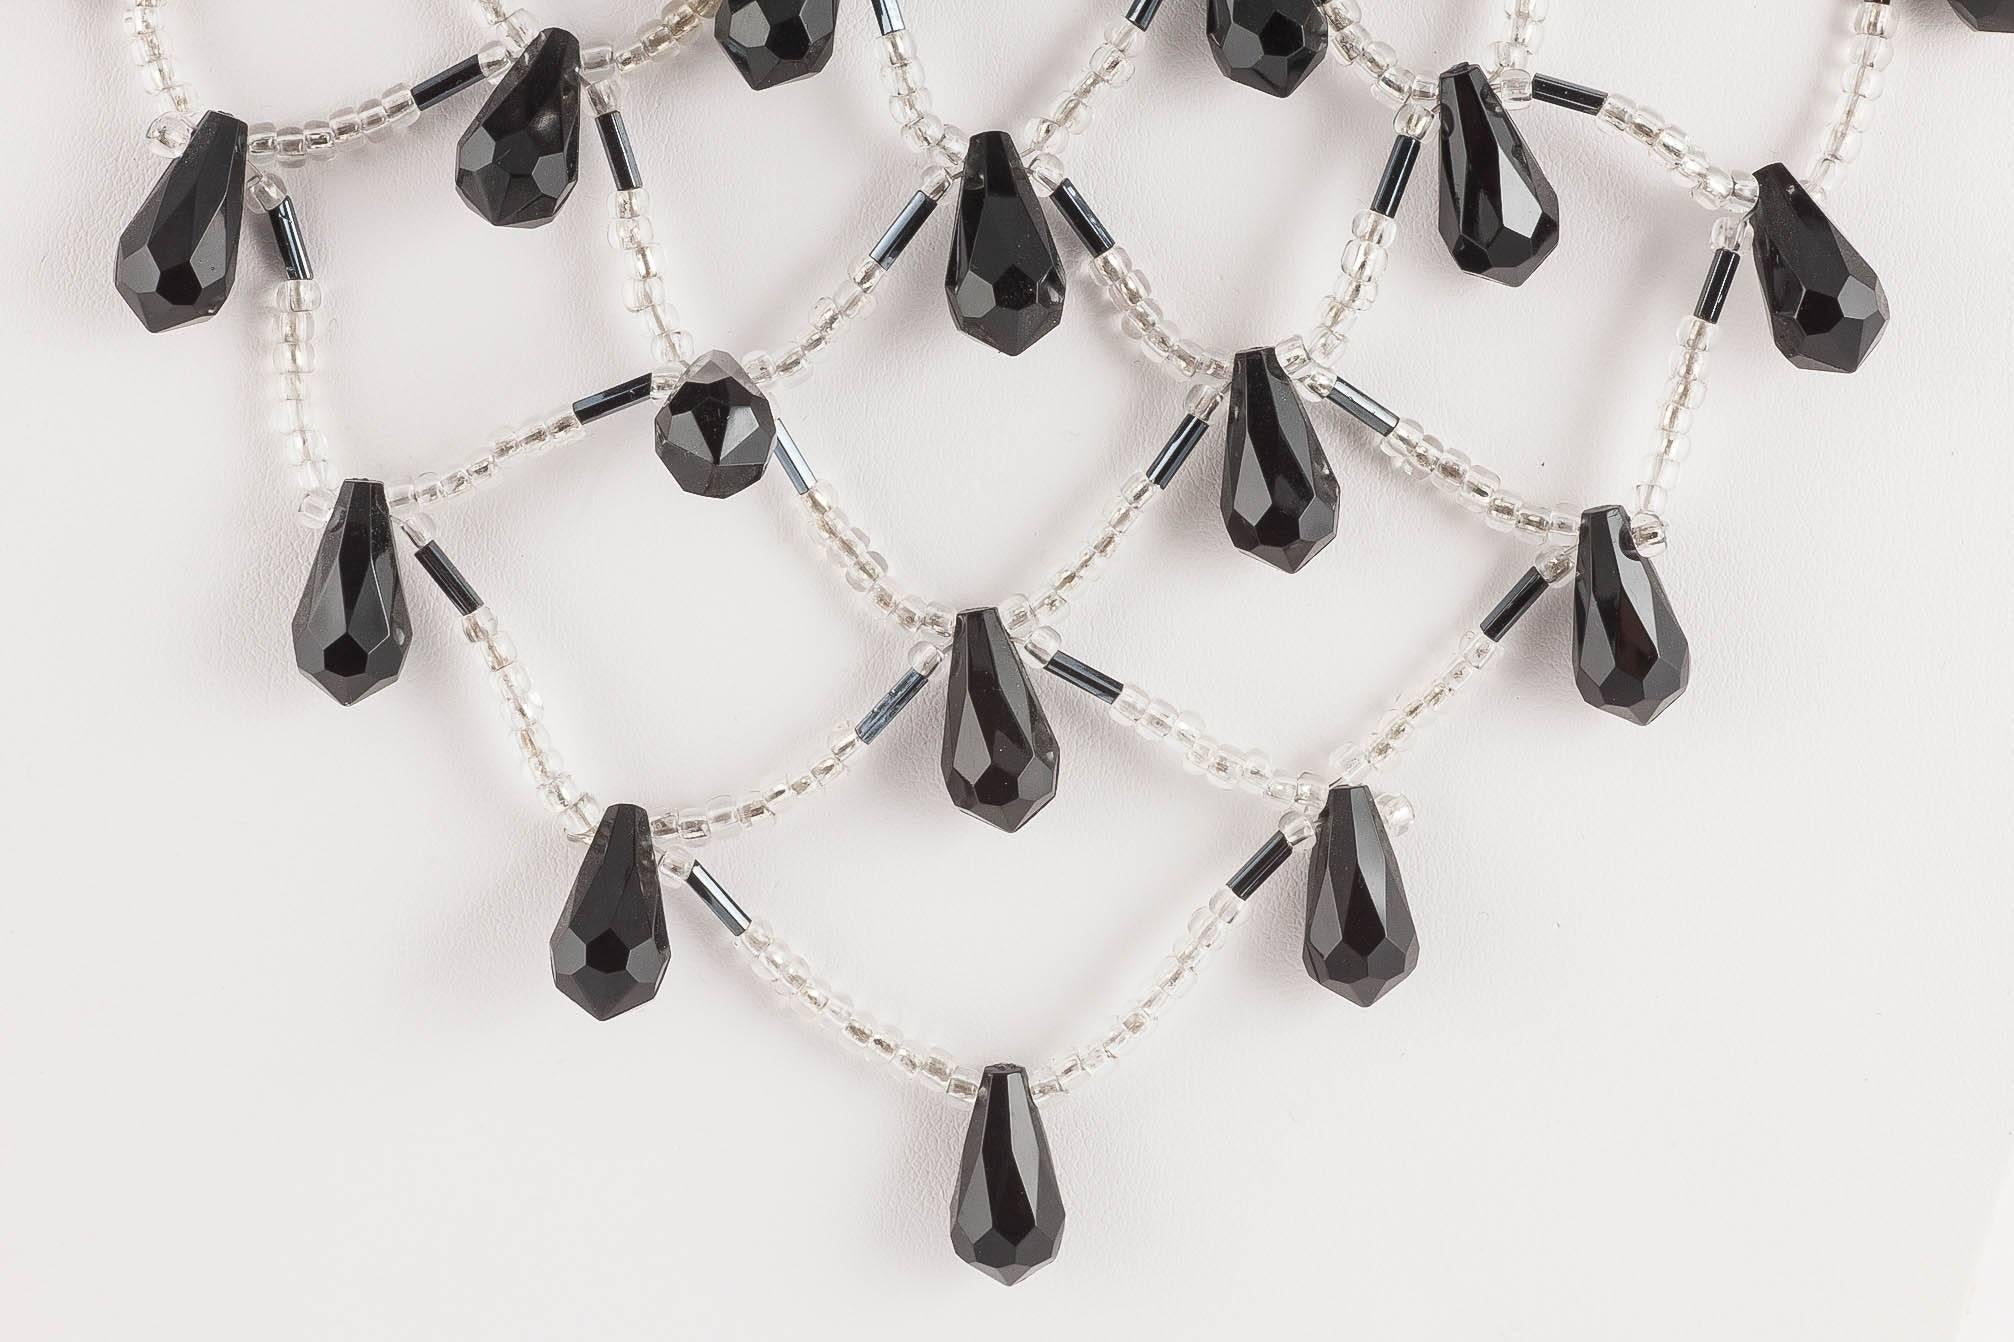 This striking bib necklace is made from larger plastic faceted teardrop beads, and haematite coloured bugle beads and clear round beads, all put together in an intricate woven design, looking dramatic and eye catching. Plastic beads were used as to